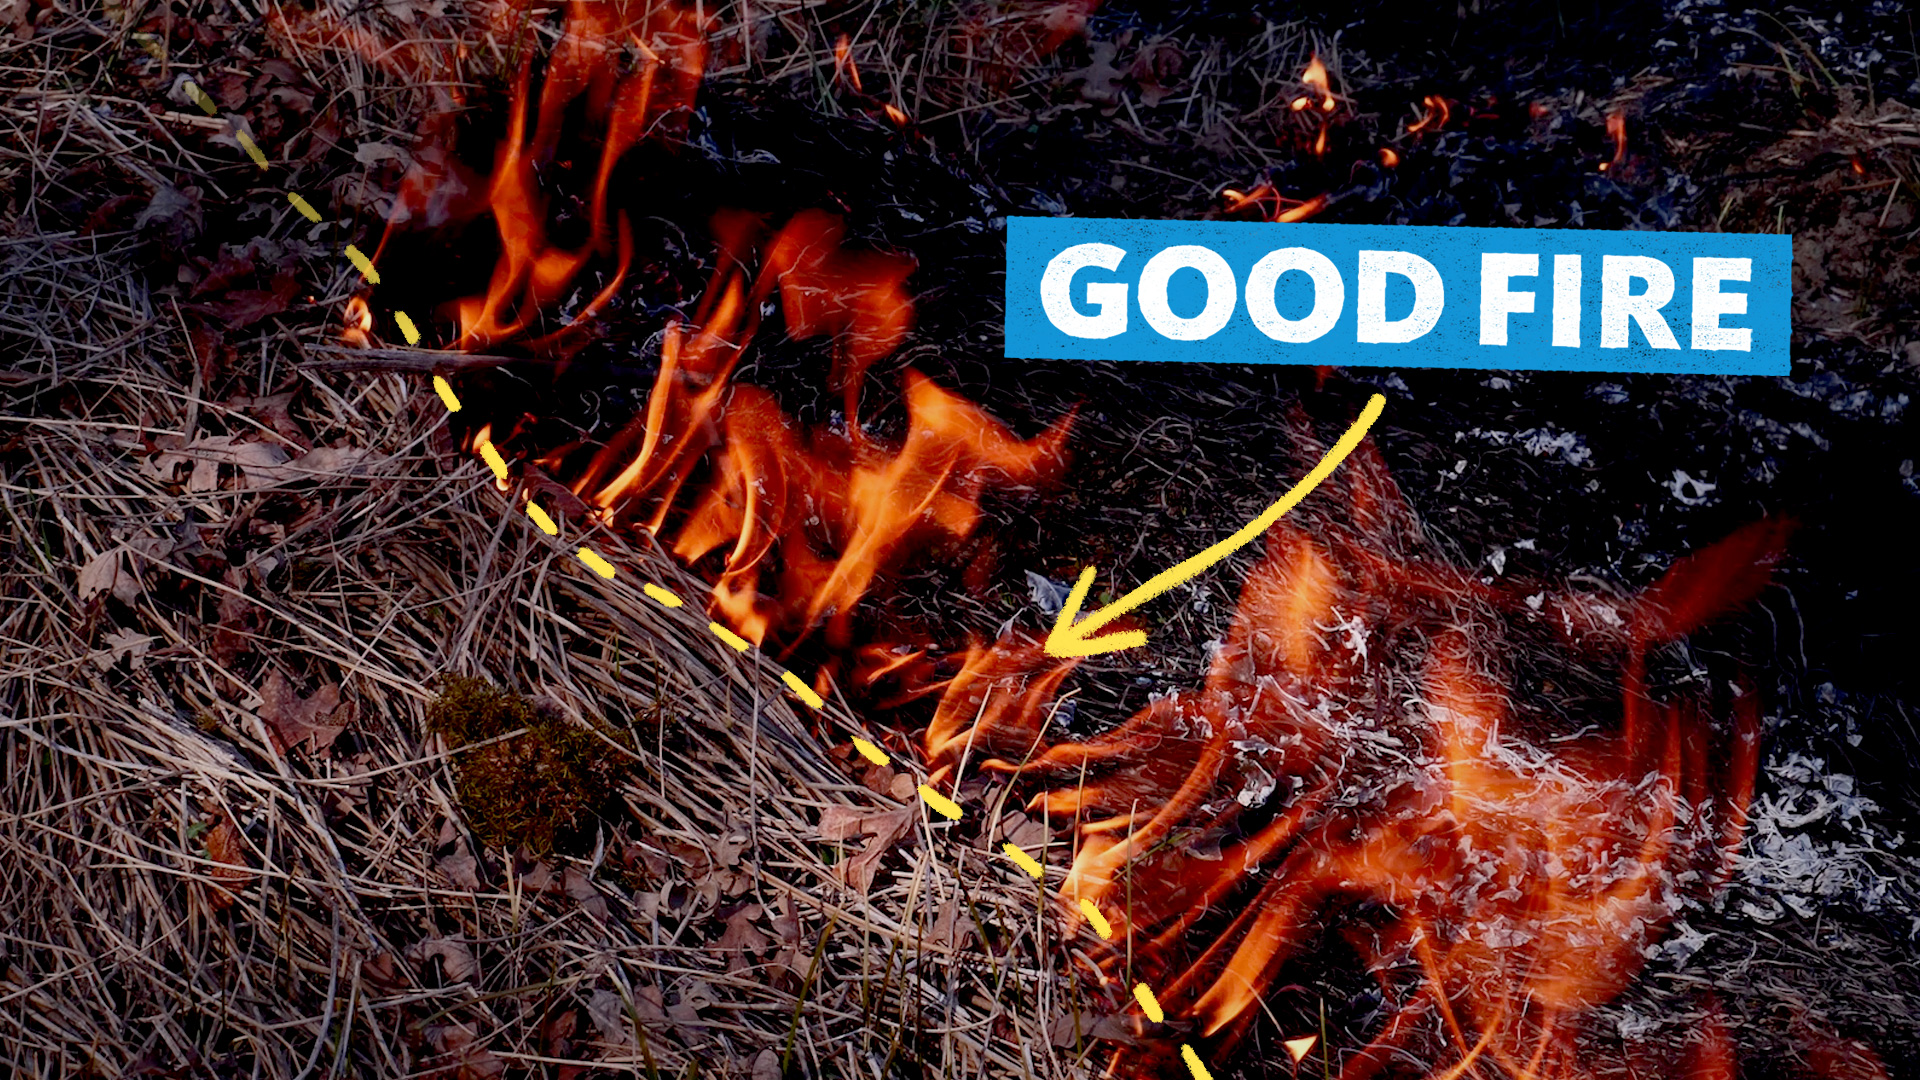 A close up photo of fire with the text "good fire" and an arrow pointing at it